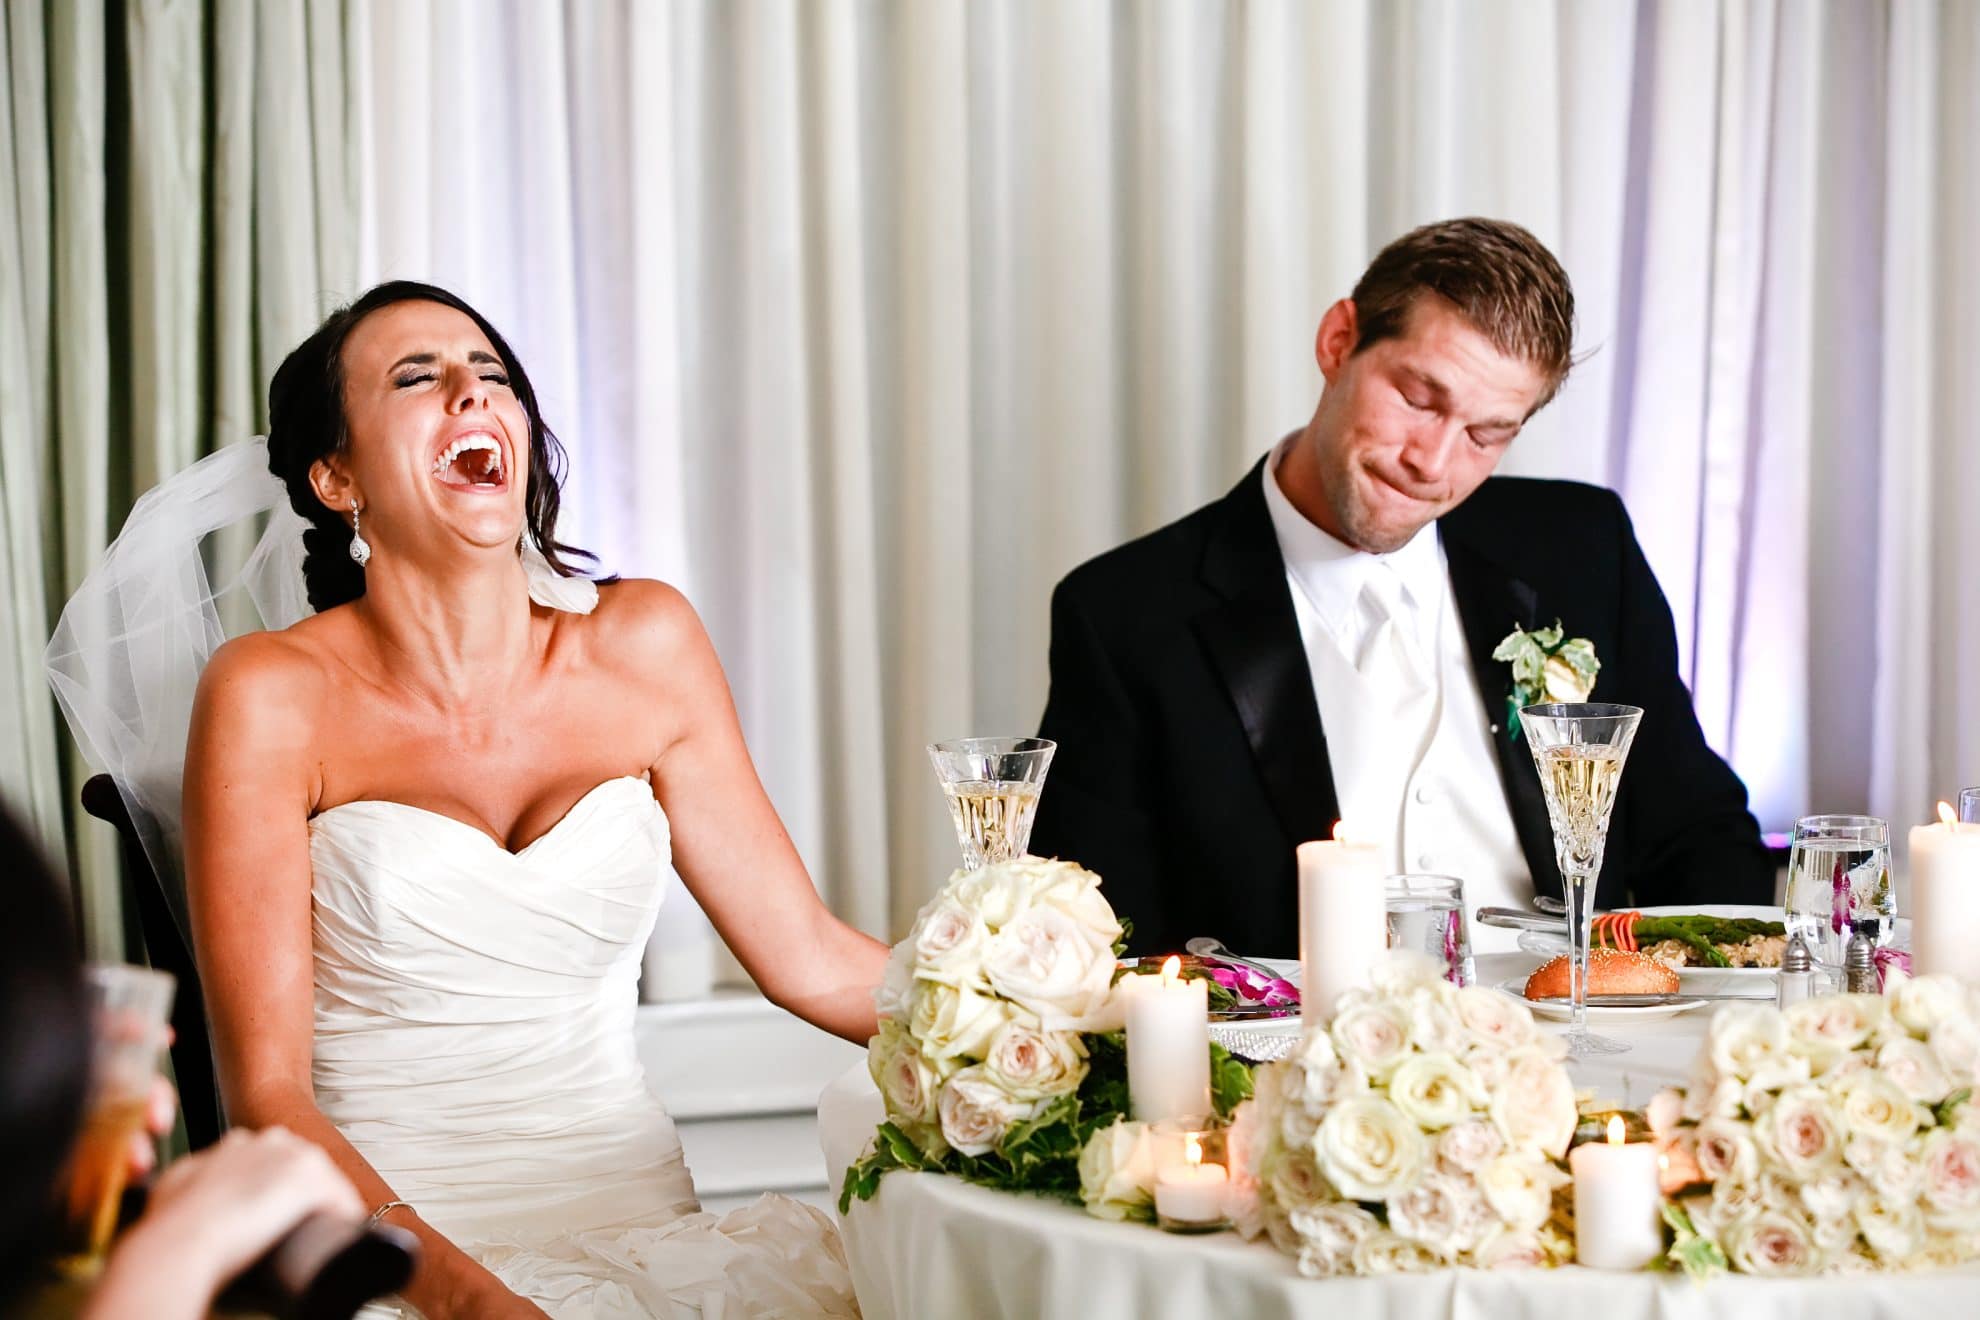 A bride is seen laughing while sitting at the table.